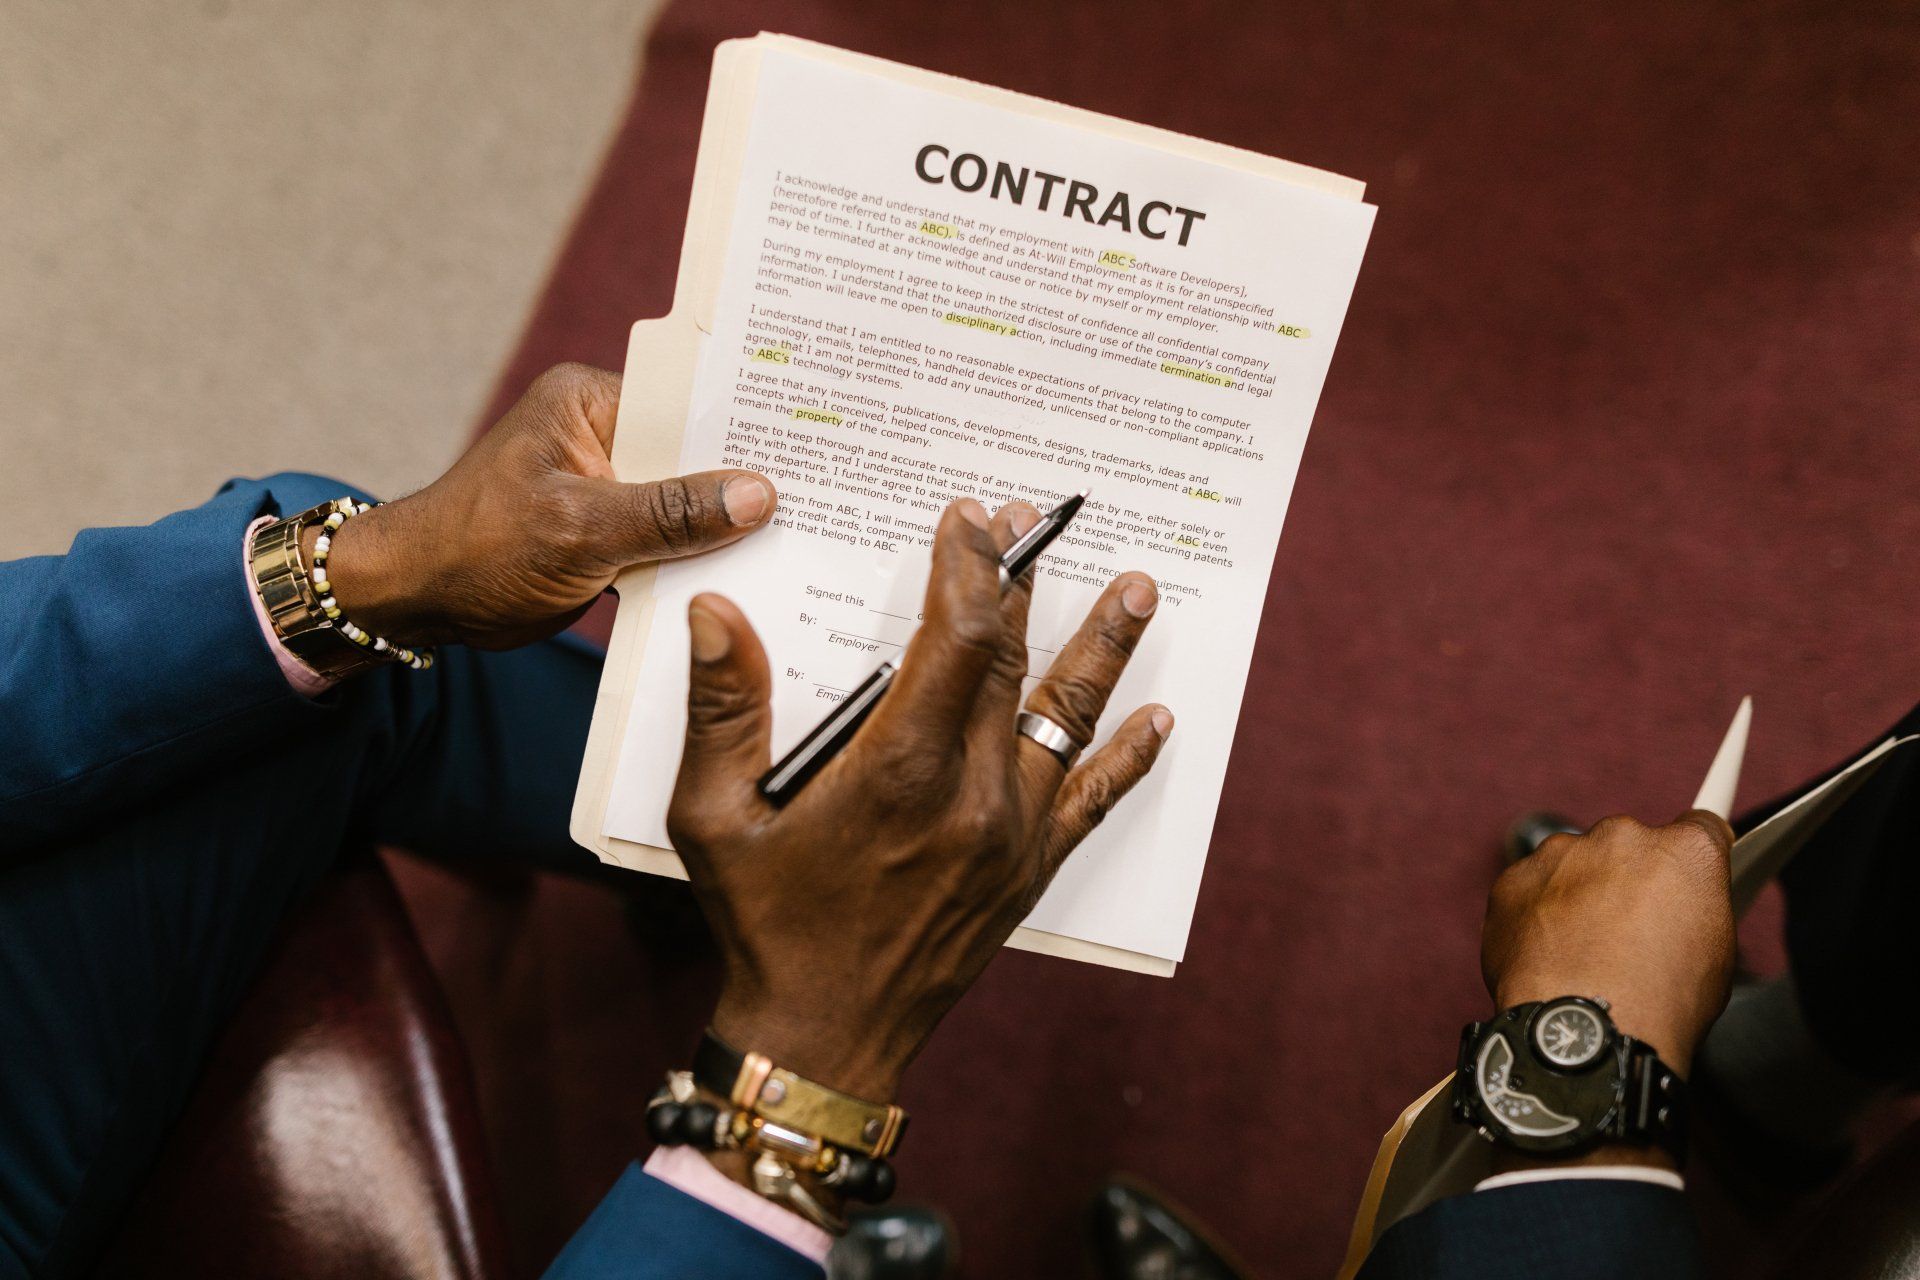 A man is signing a contract with a pen.